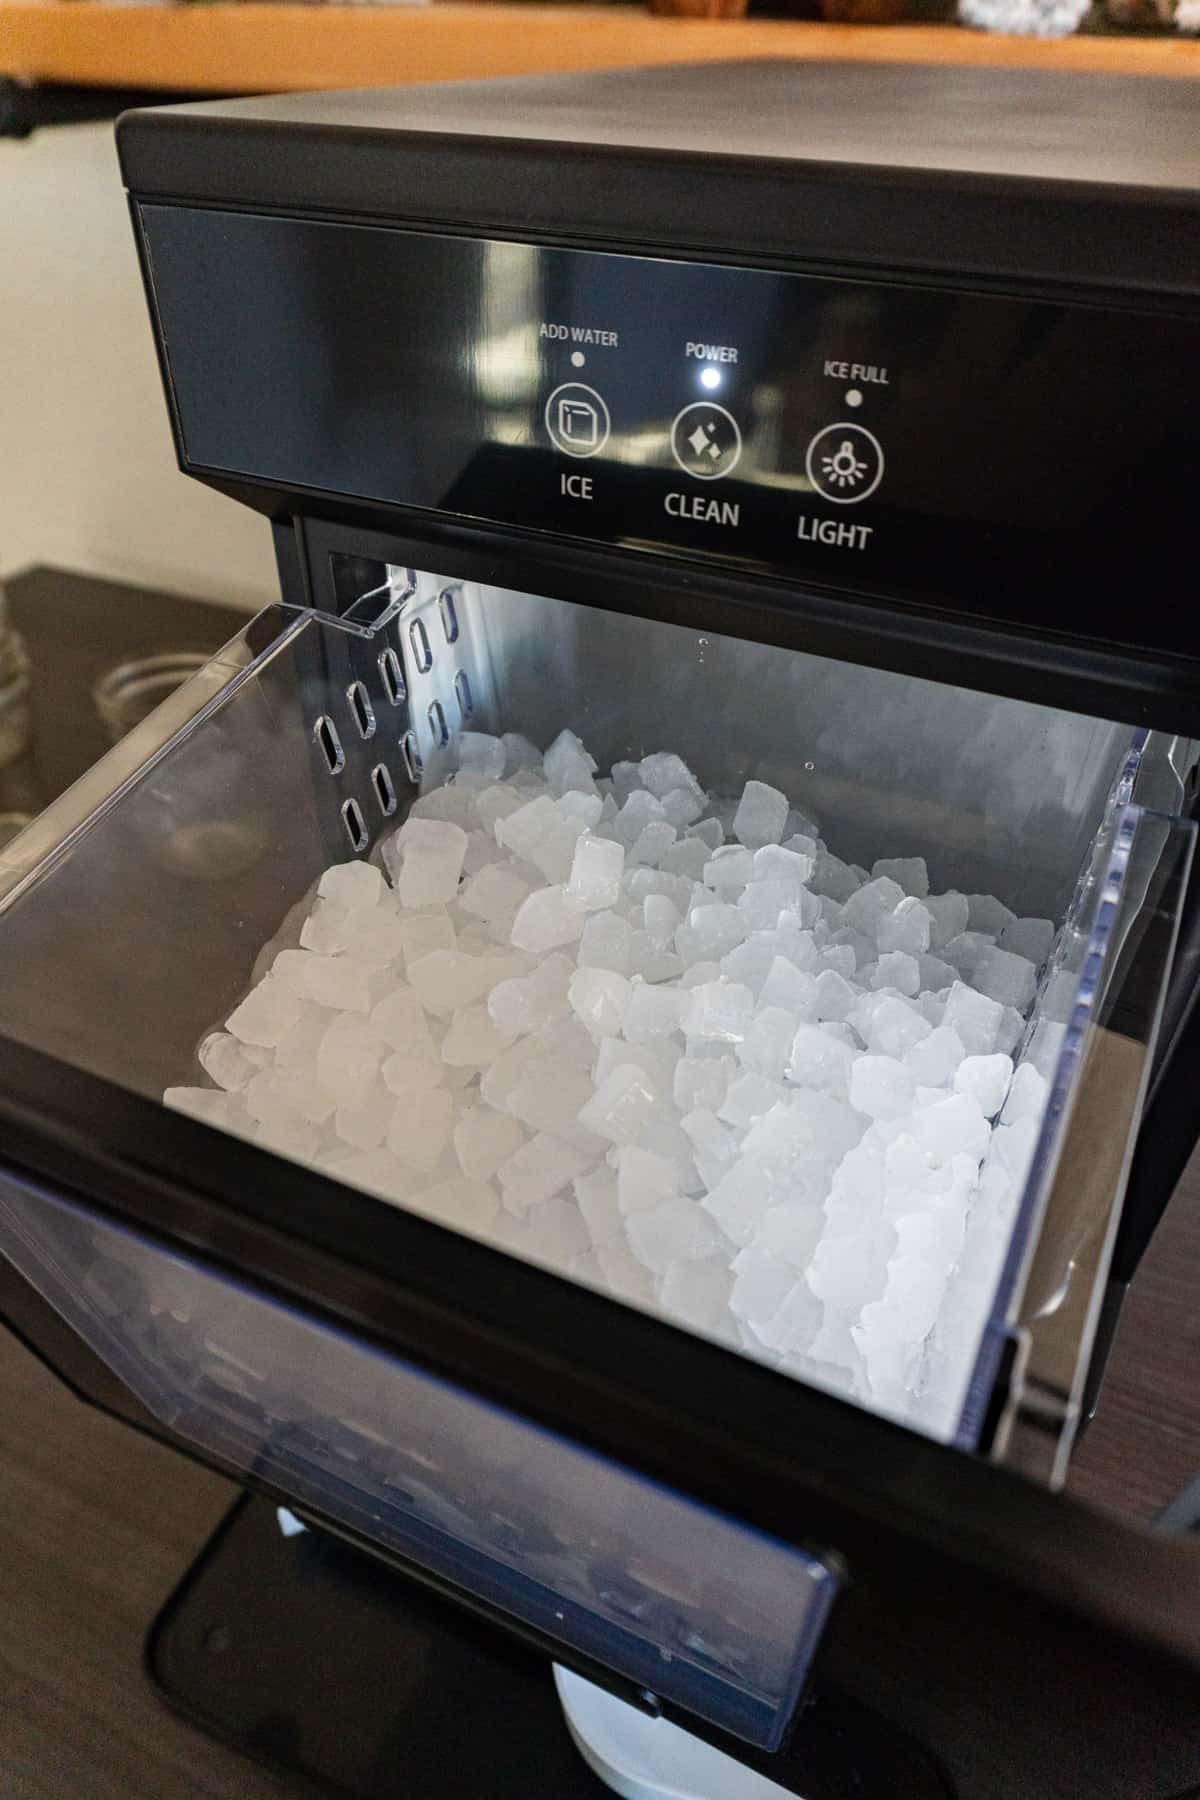 nugget ice maker drawer pulled out showing ice